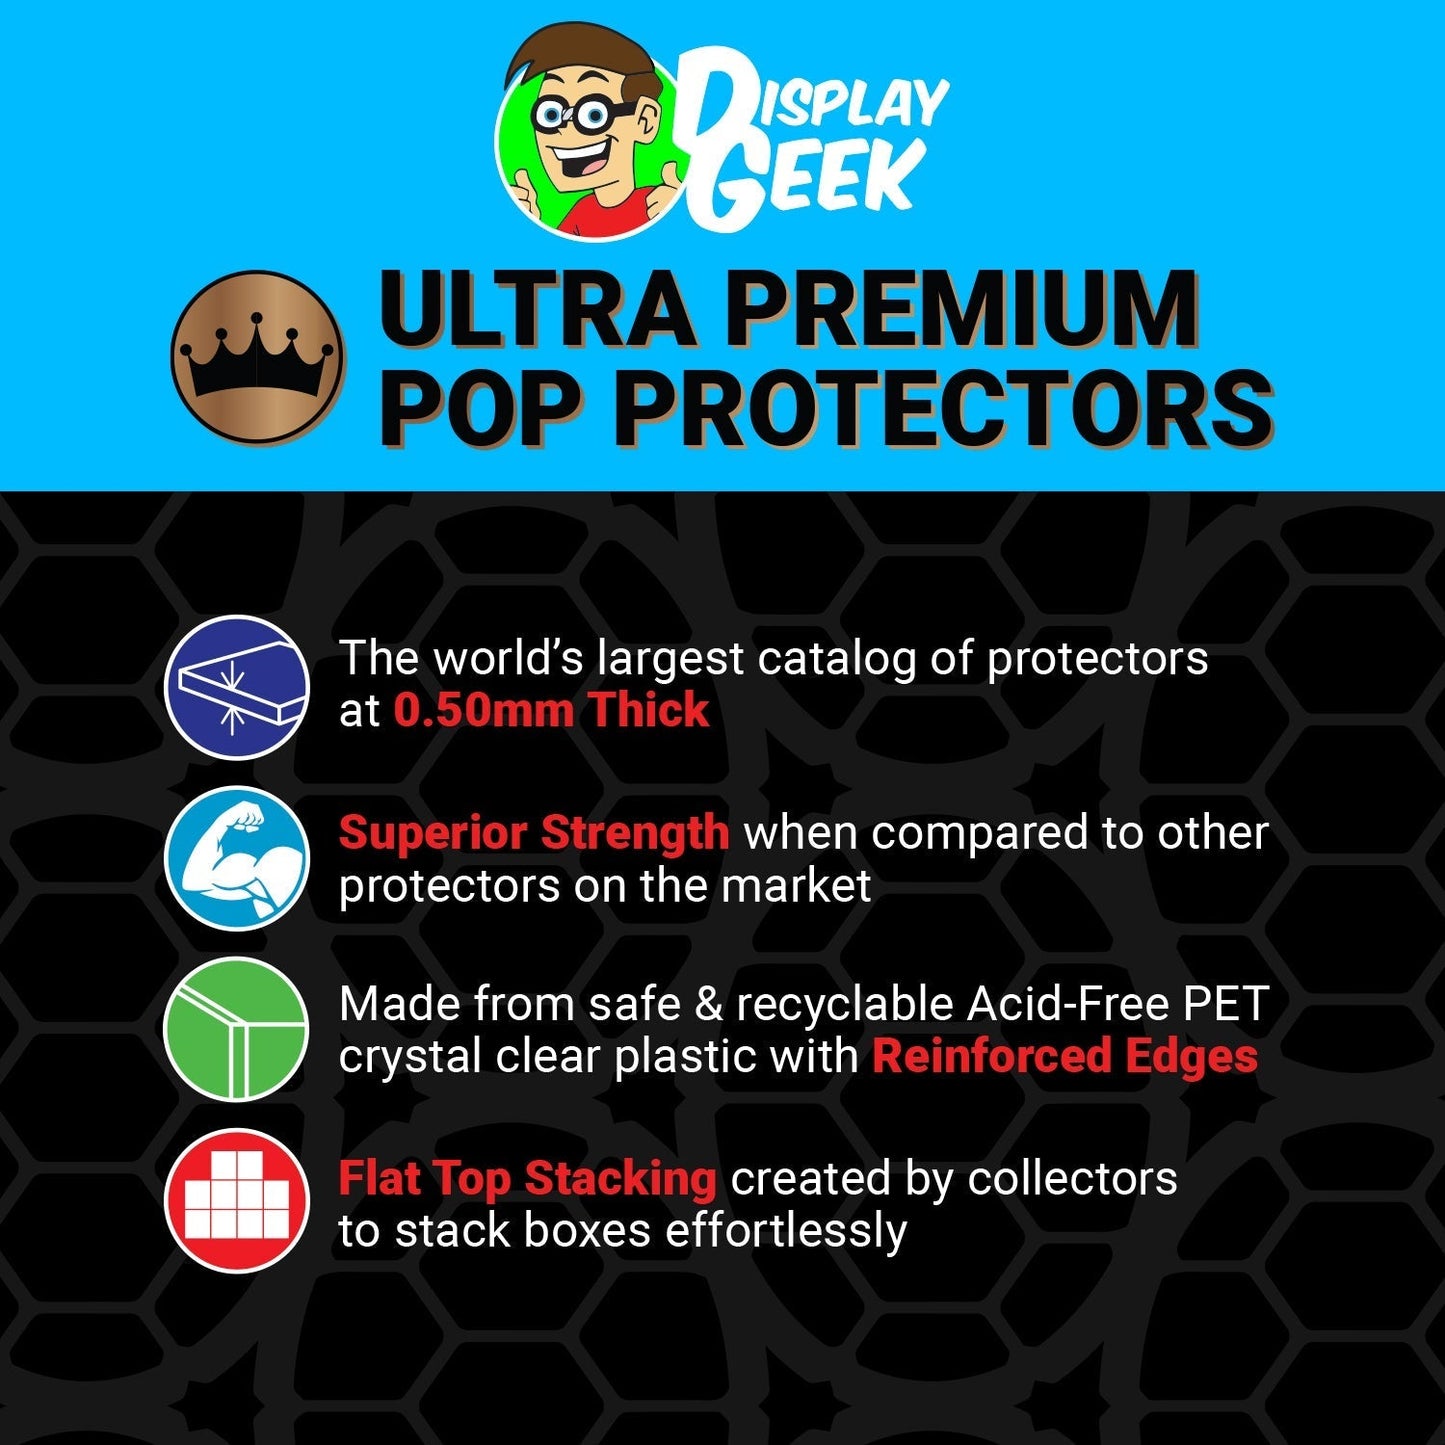 Pop Protector for Sweet Days are Here Funko A Day with Pikachu - PPG Pop Protector Guide Search Created by Display Geek